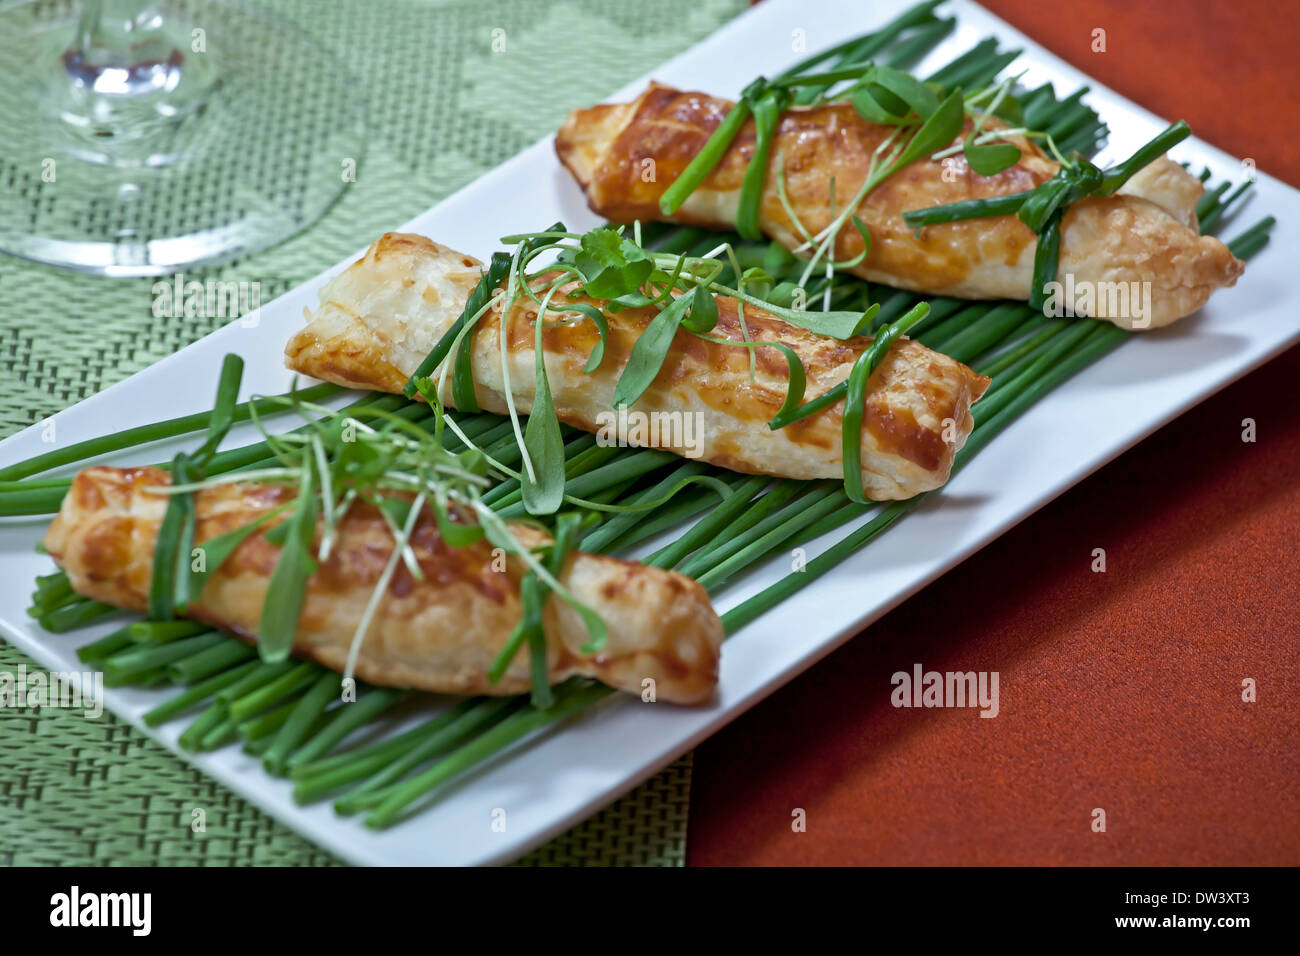 Puff pastry stuffed with cheese Stock Photo